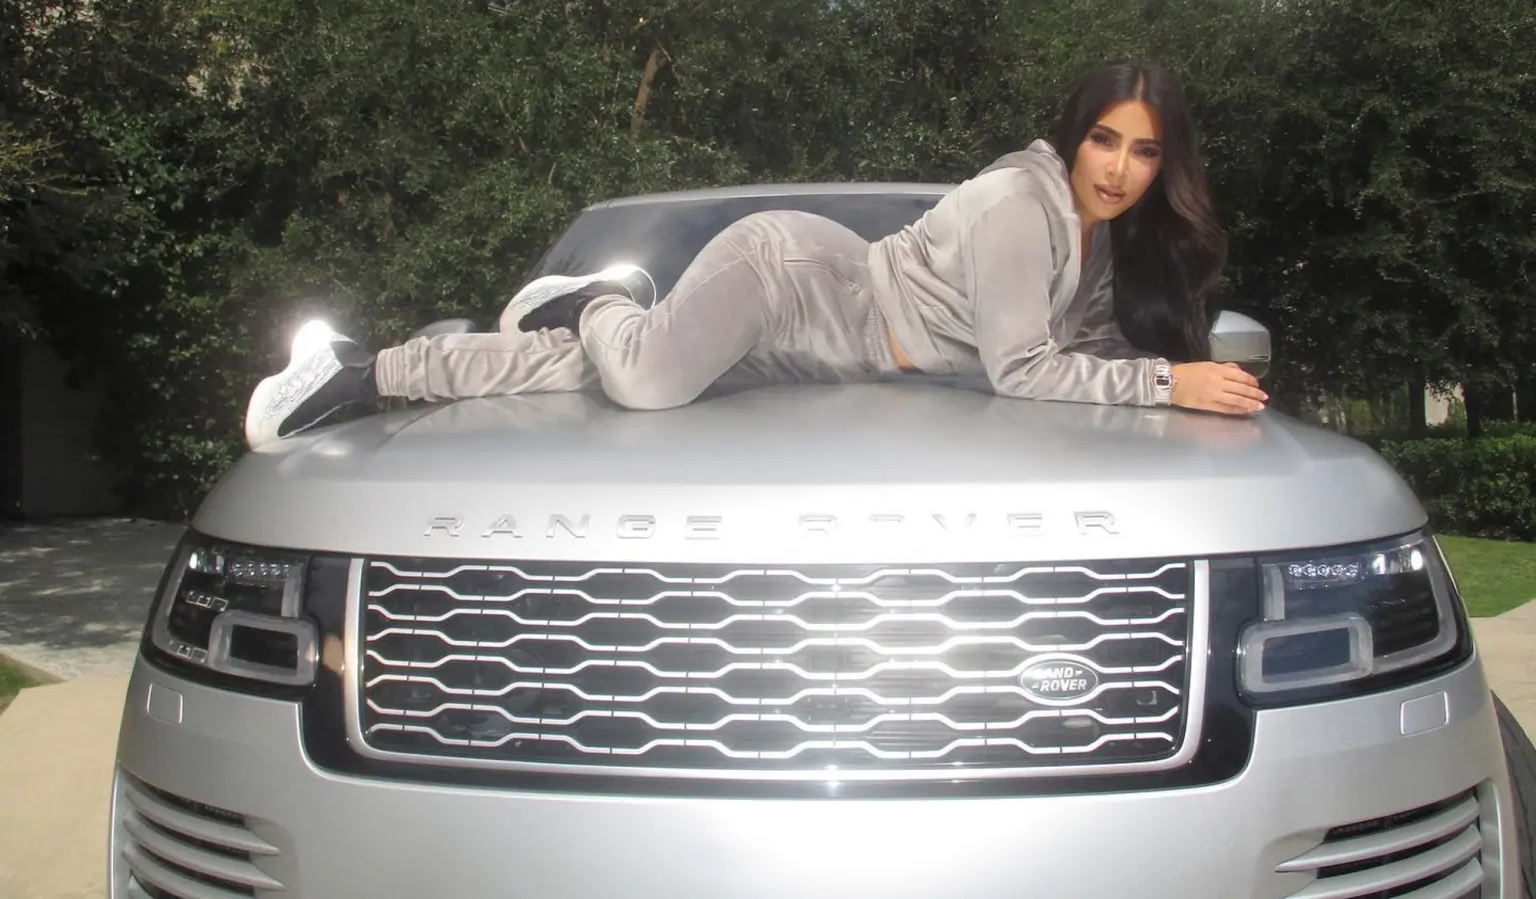 Kim Kardashian’s wrecked 2022 Range Rover is up for sale for $100K